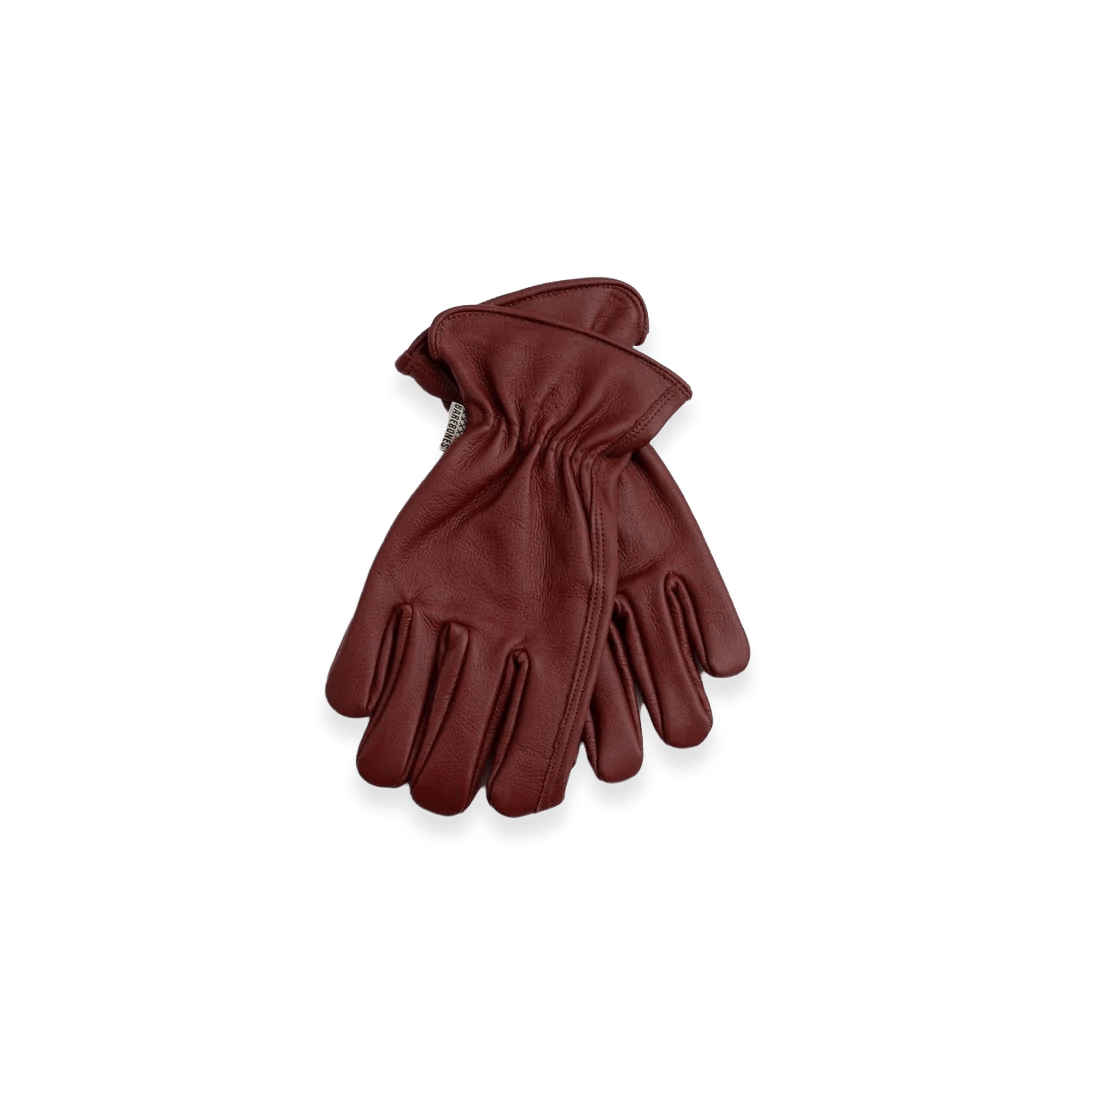 Barebones Classic Work Glove: Durable Leather Gardening Gloves for men and